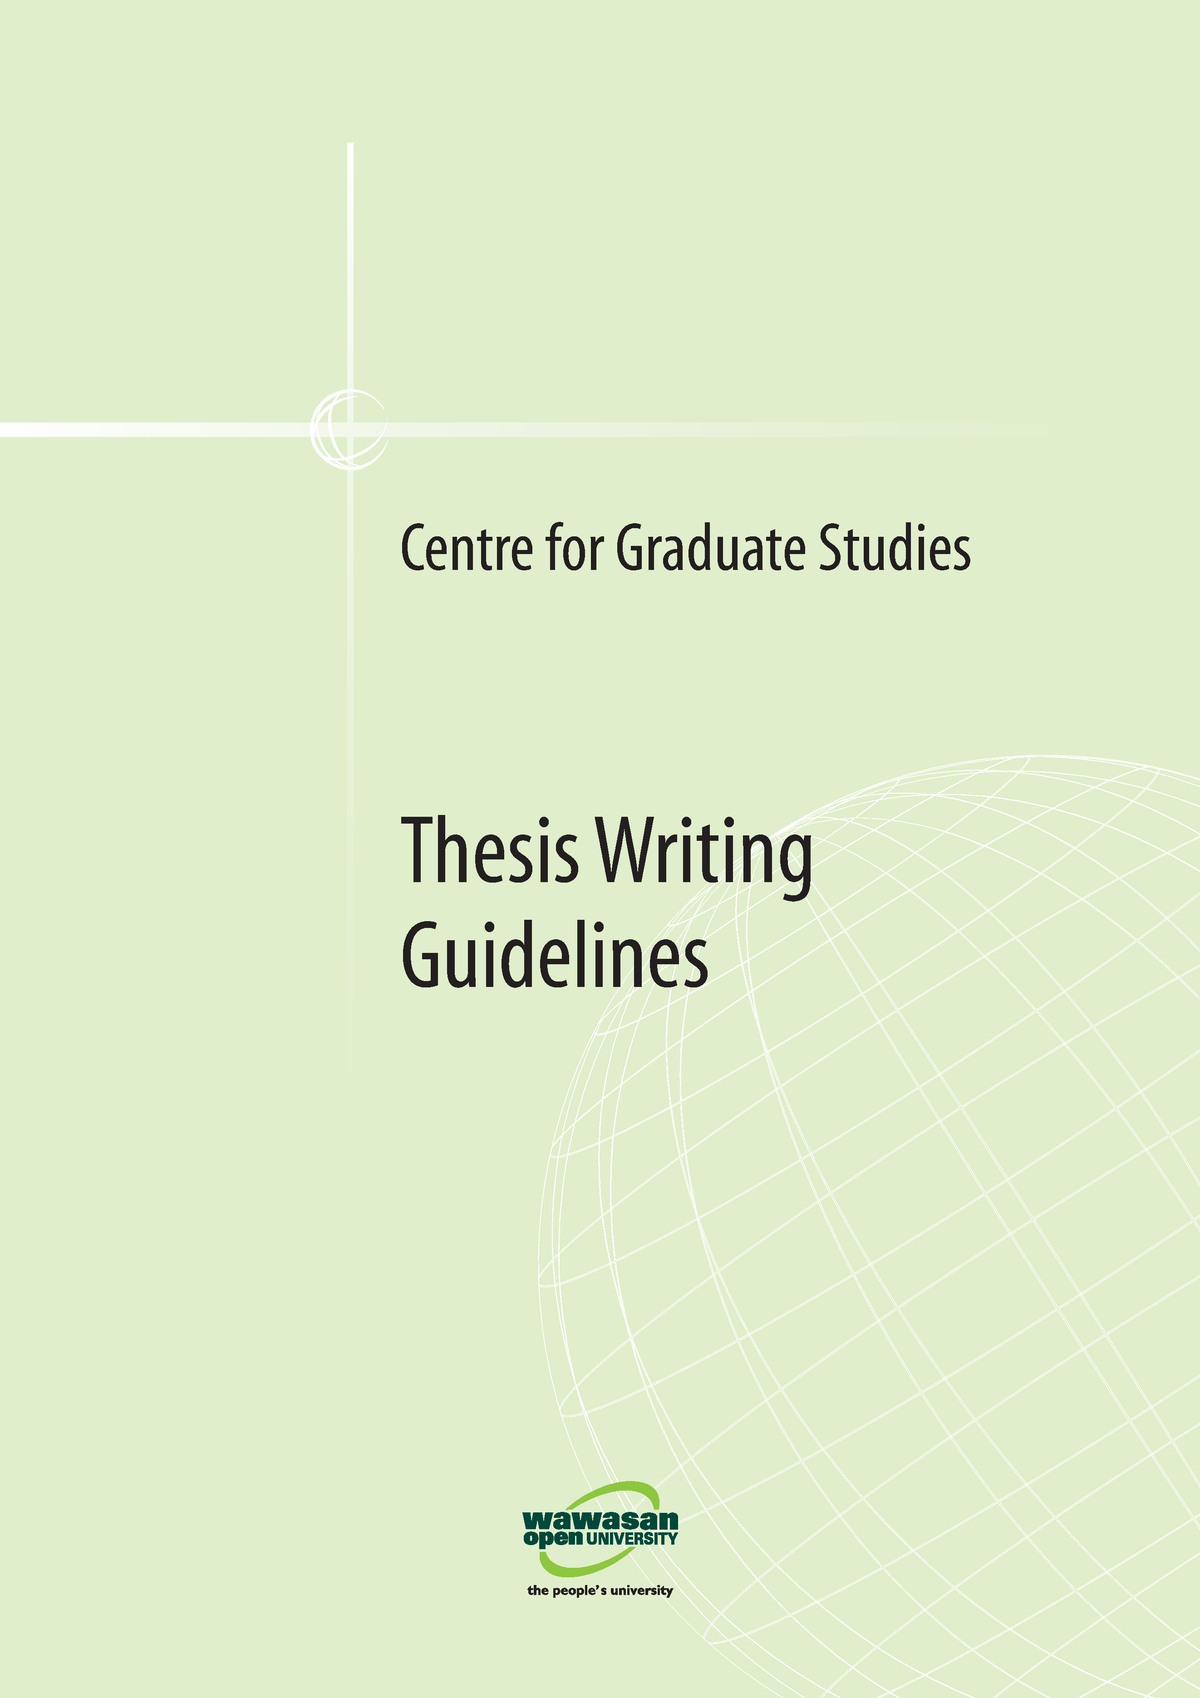 newcastle university phd thesis guidelines